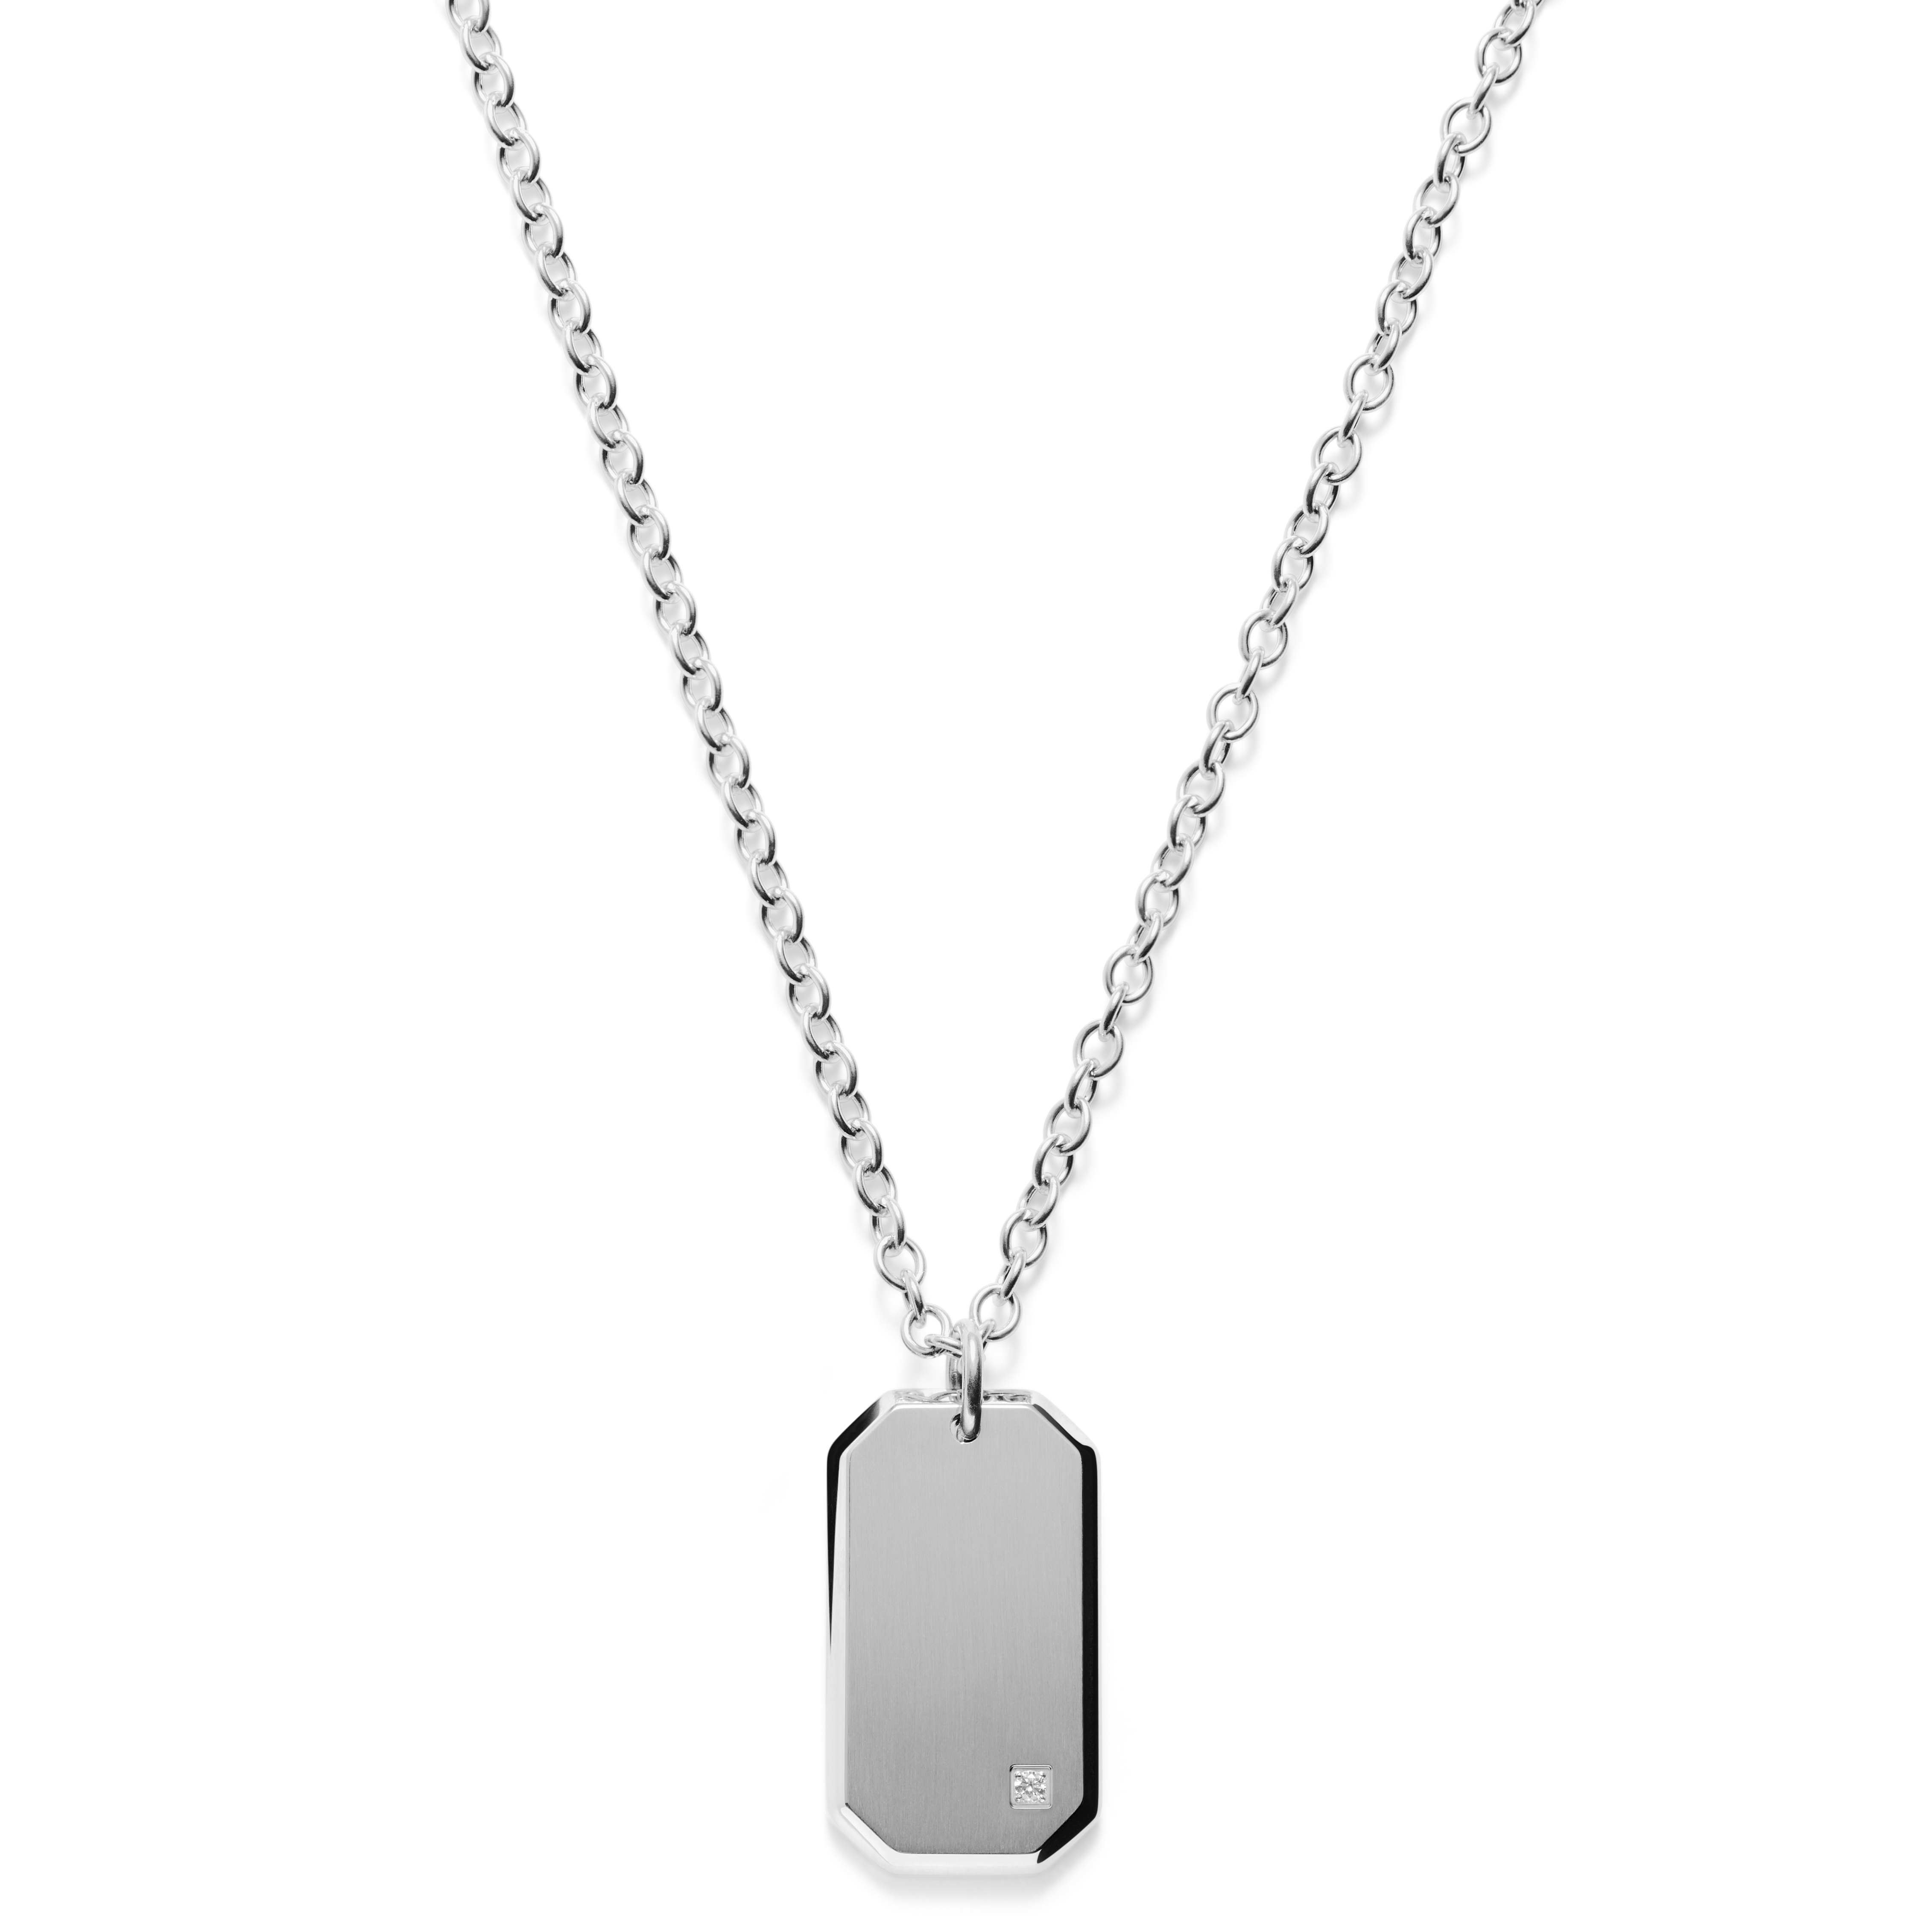 Buy Yellow Chimes Pendant for Men and Boys Black Dog Tag for Men | Silver  Toned Army Dog Tag Pendant Necklace For Men Jewelry Stainless Steel Pendant  Chain for Men | Birthday